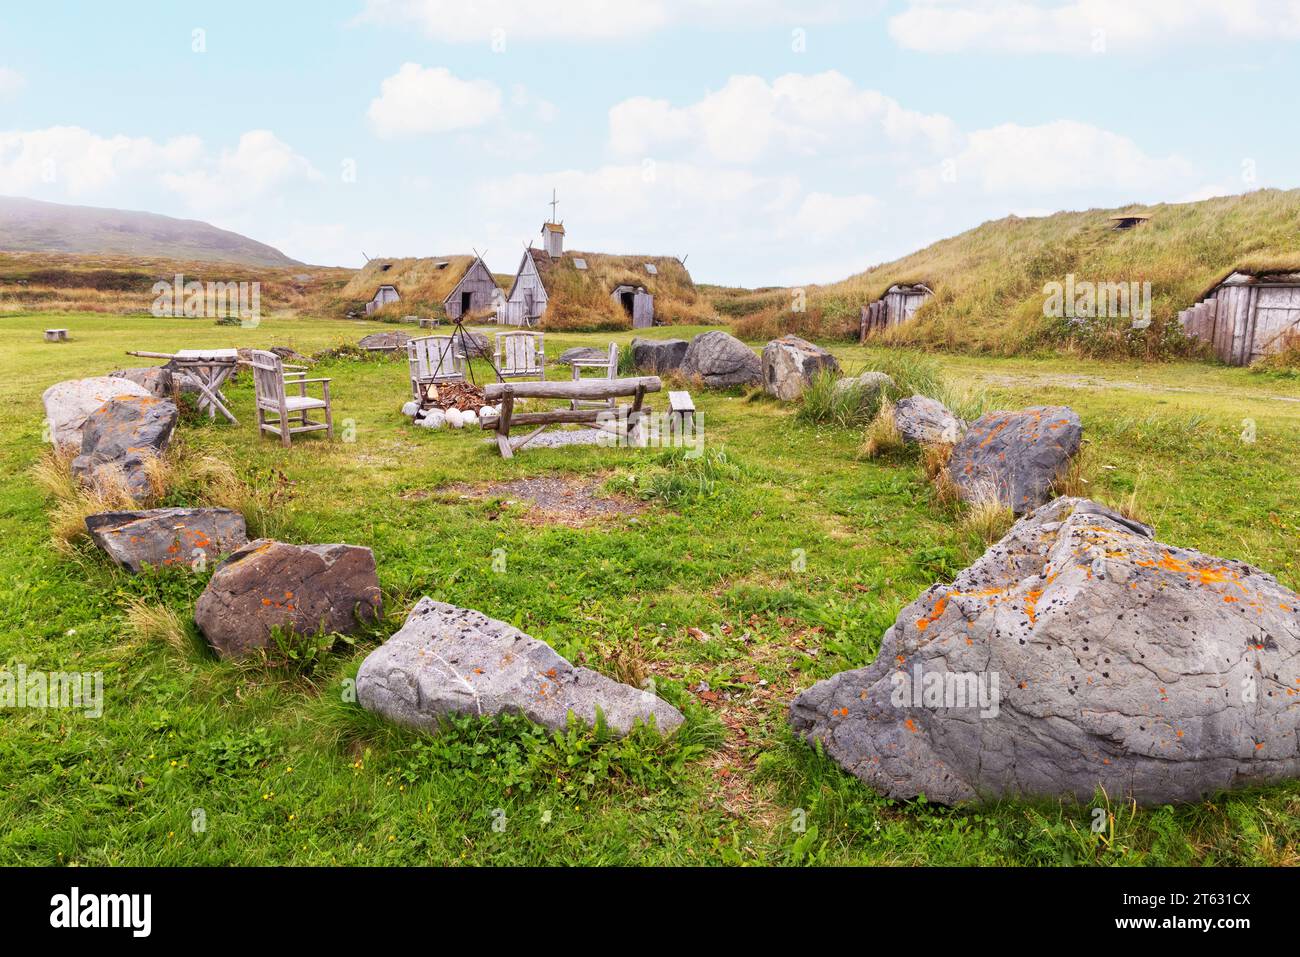 Exterior of reconstructed buildings and church, L'Anse aux Meadows UNESCO site, viking/norse settlement of a thousand years ago, Newfoundland Canada. Stock Photo